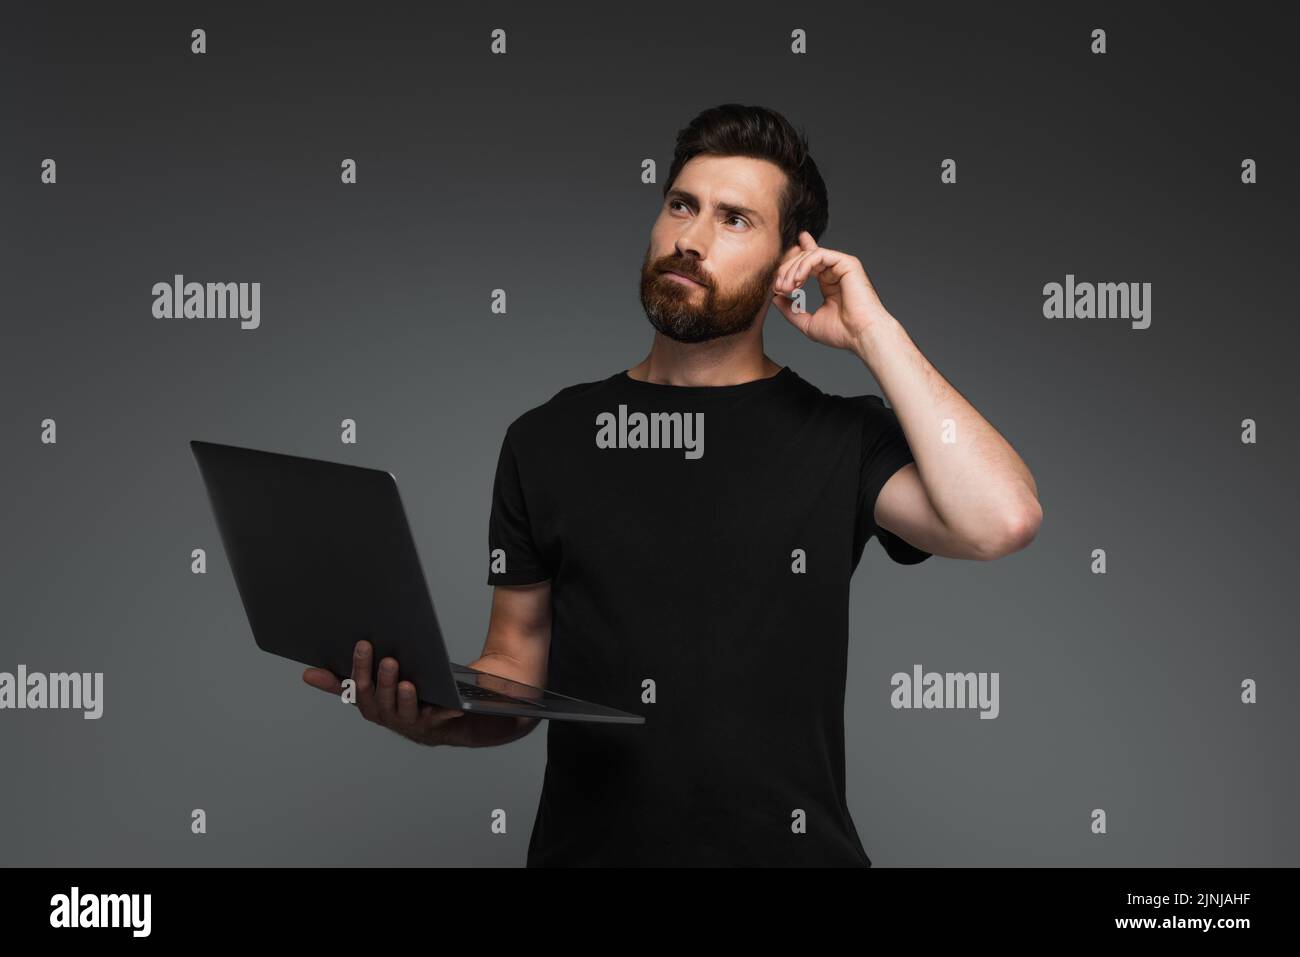 pensive freelancer with beard holding laptop and looking away isolated on grey,stock image Stock Photo